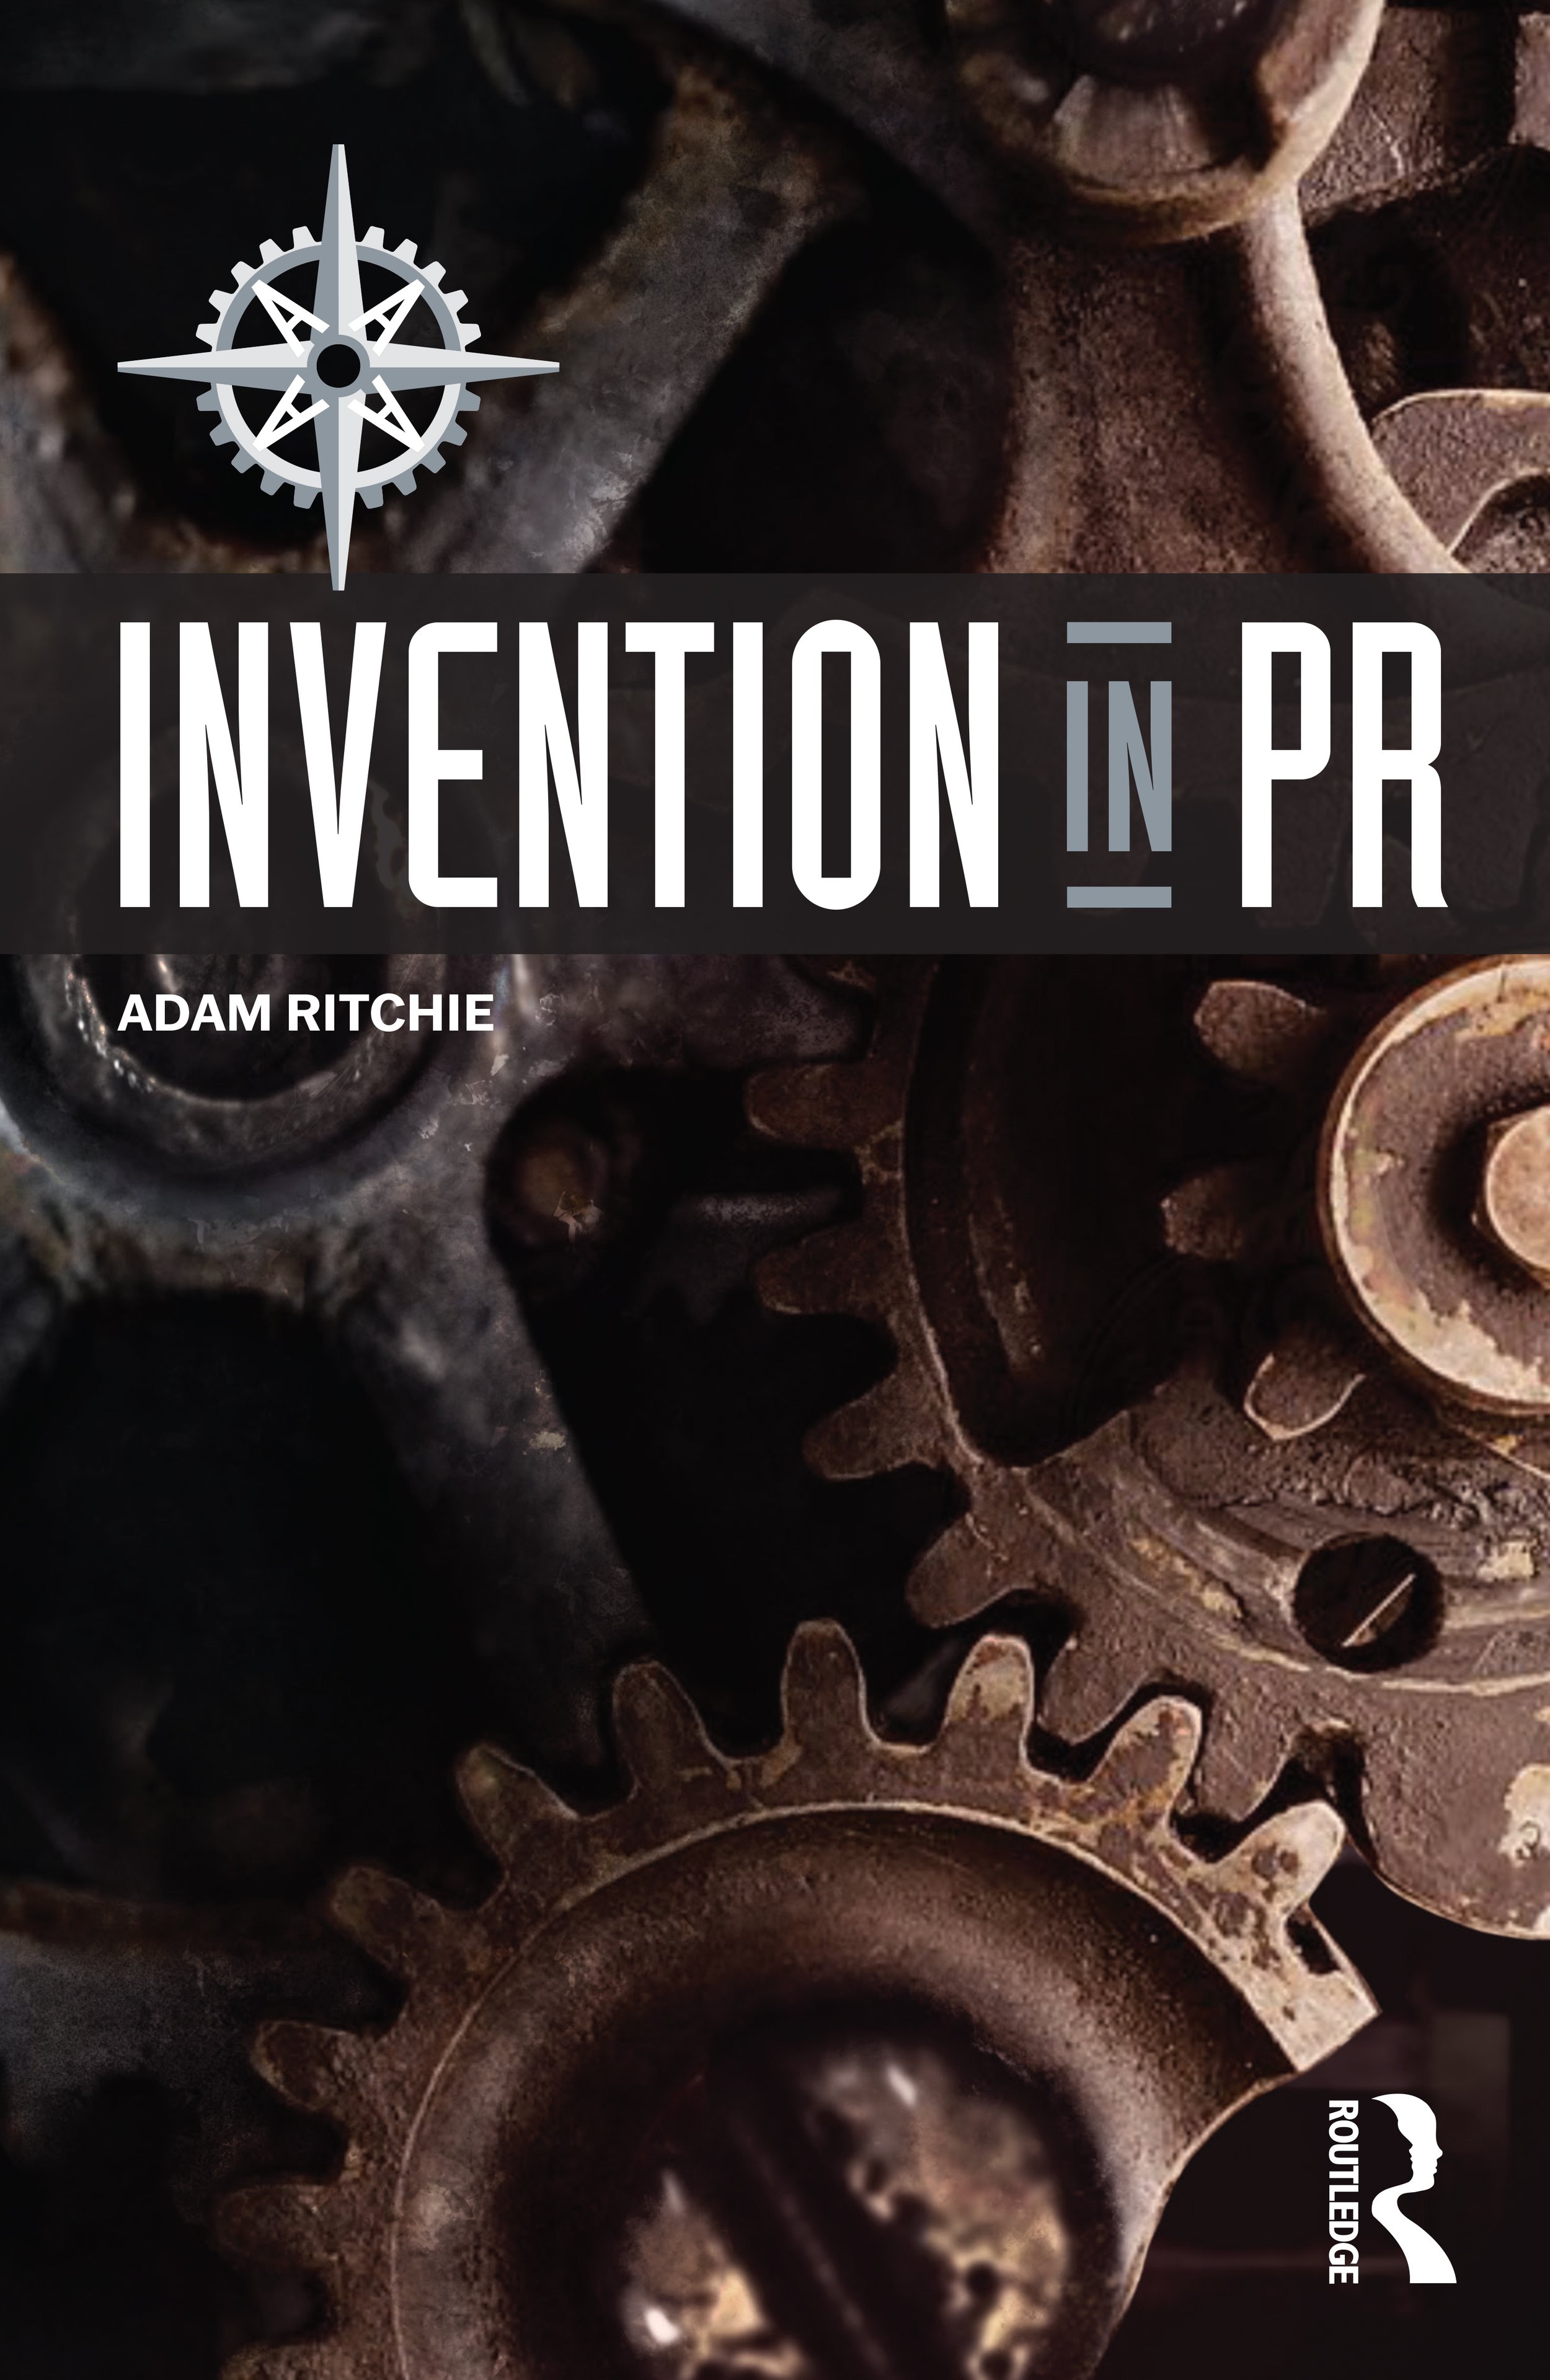 "Invention in PR" cover art (Routledge, 2022)